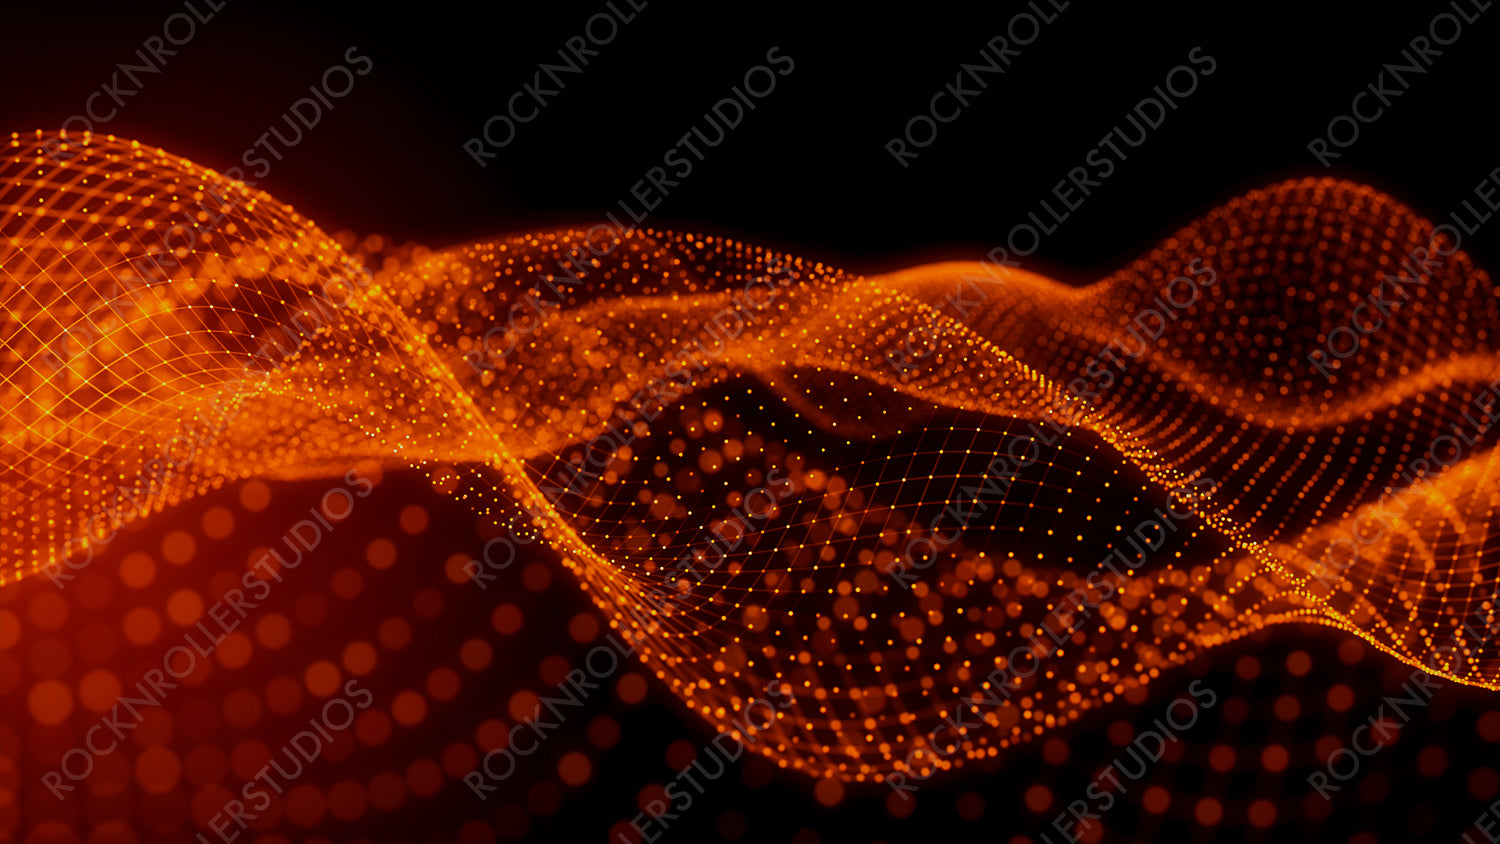 Smart Network and Connection Concept. Orange, Futuristic Digital Style. 3D Render.